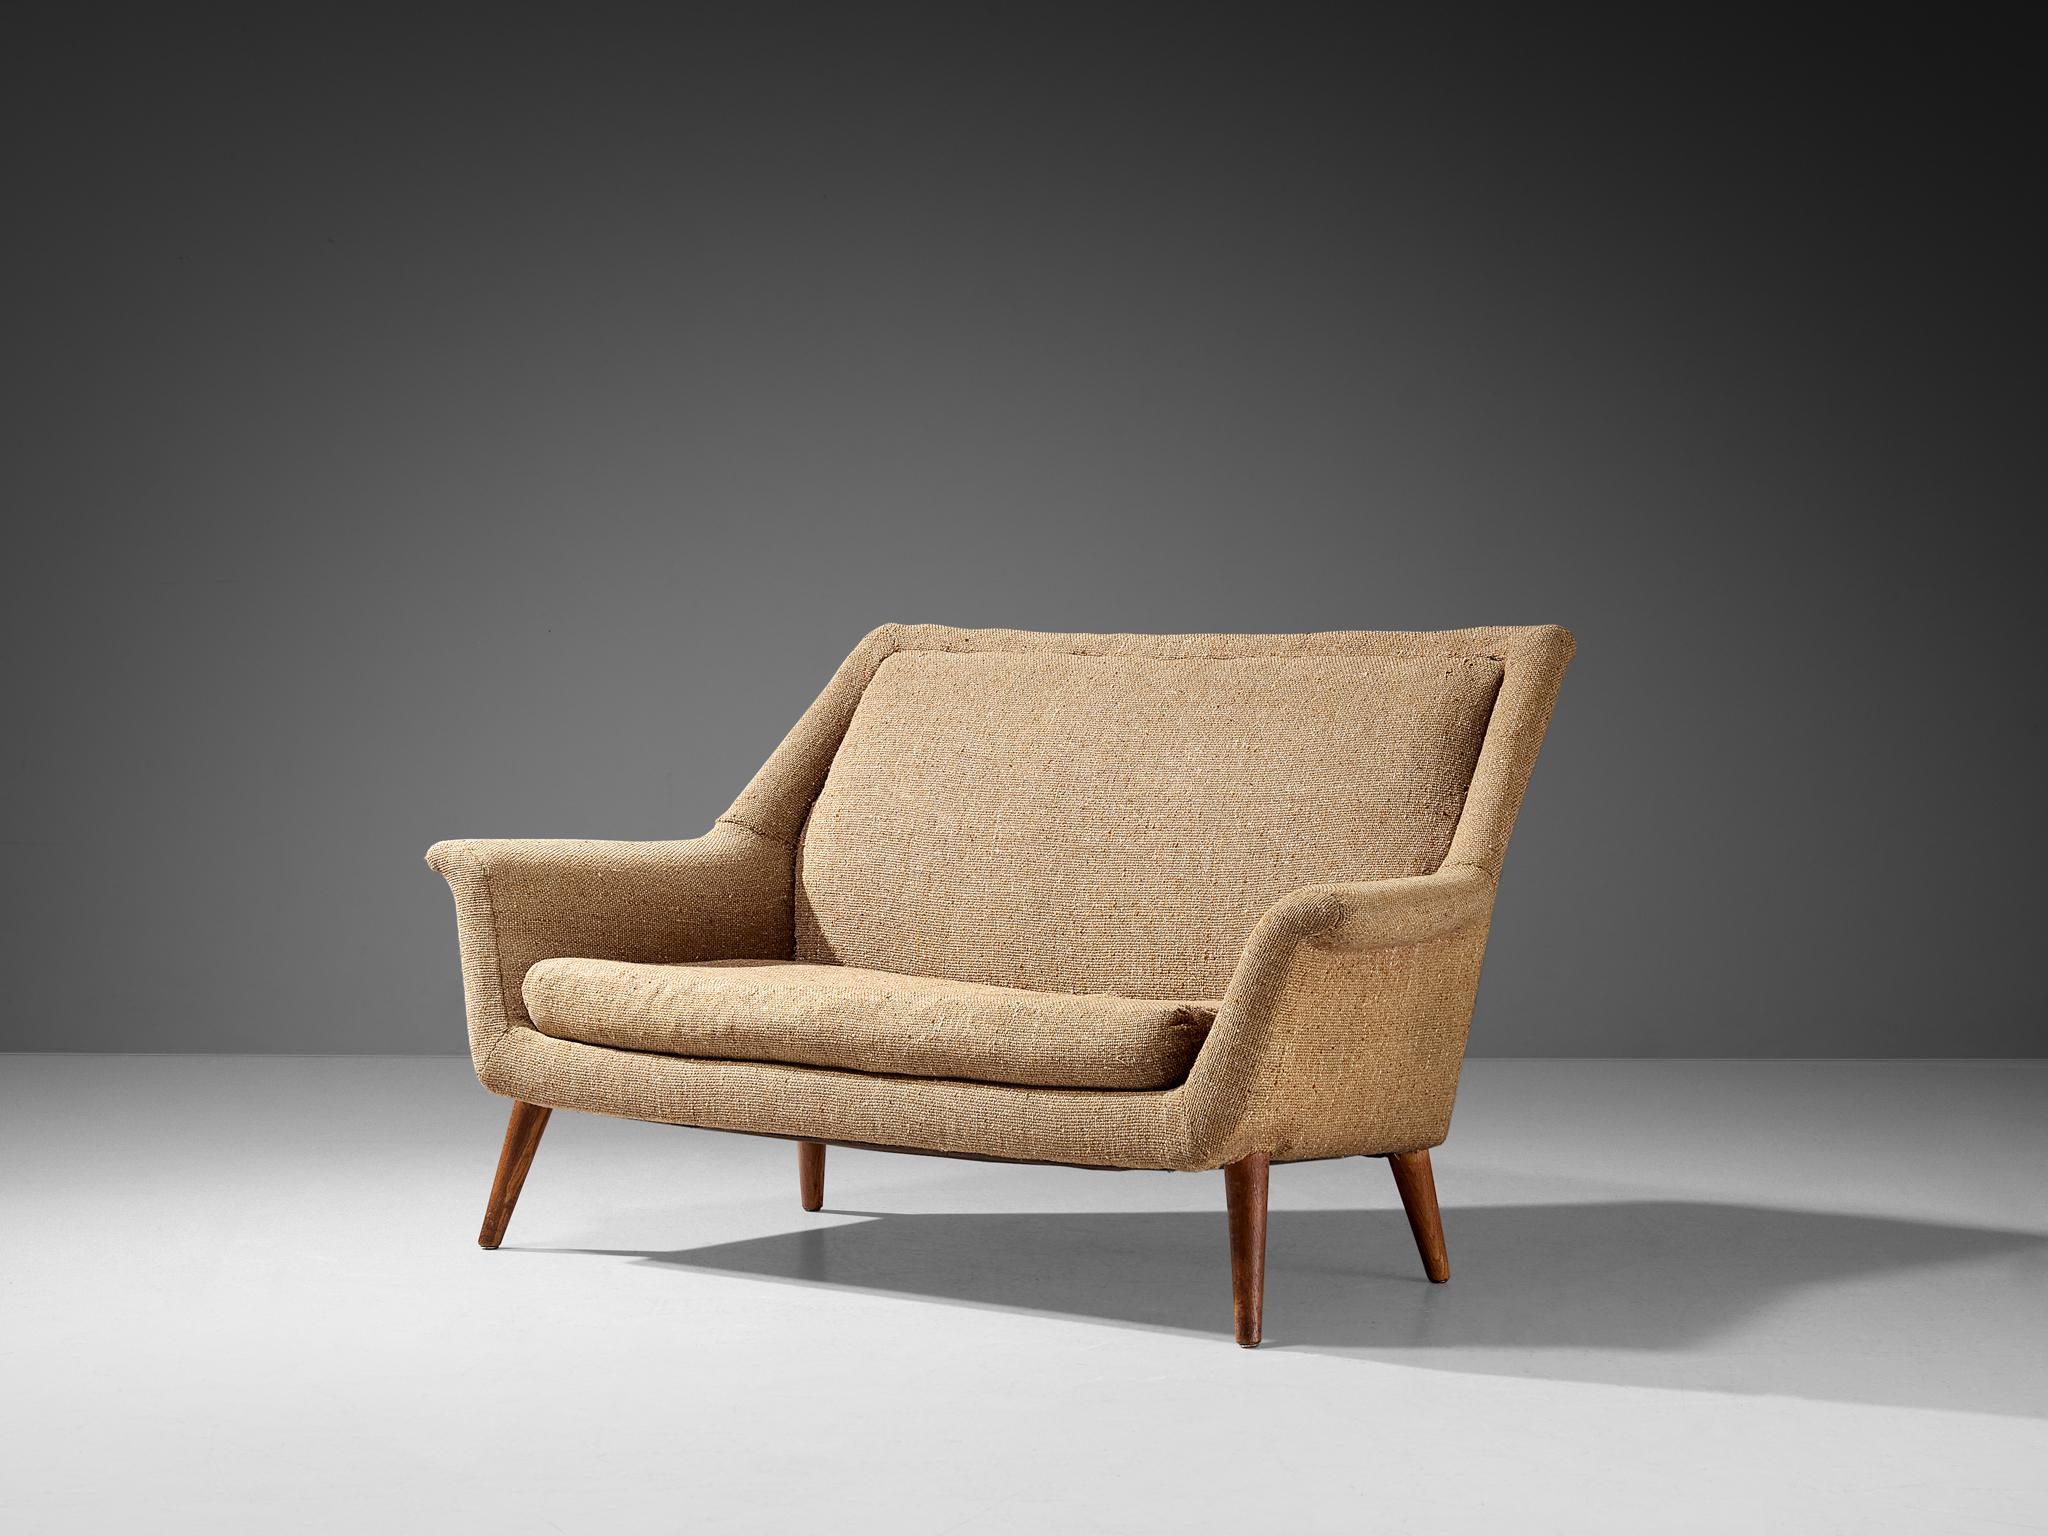 Sofa or settee, wool, teak, United Kingdom, 1960s.

This sofa has all the flair and vitality of a typical mid-century furniture piece. A nice detail is how the back smoothly runs over into the armrests, developing in a winged shape on both ends,